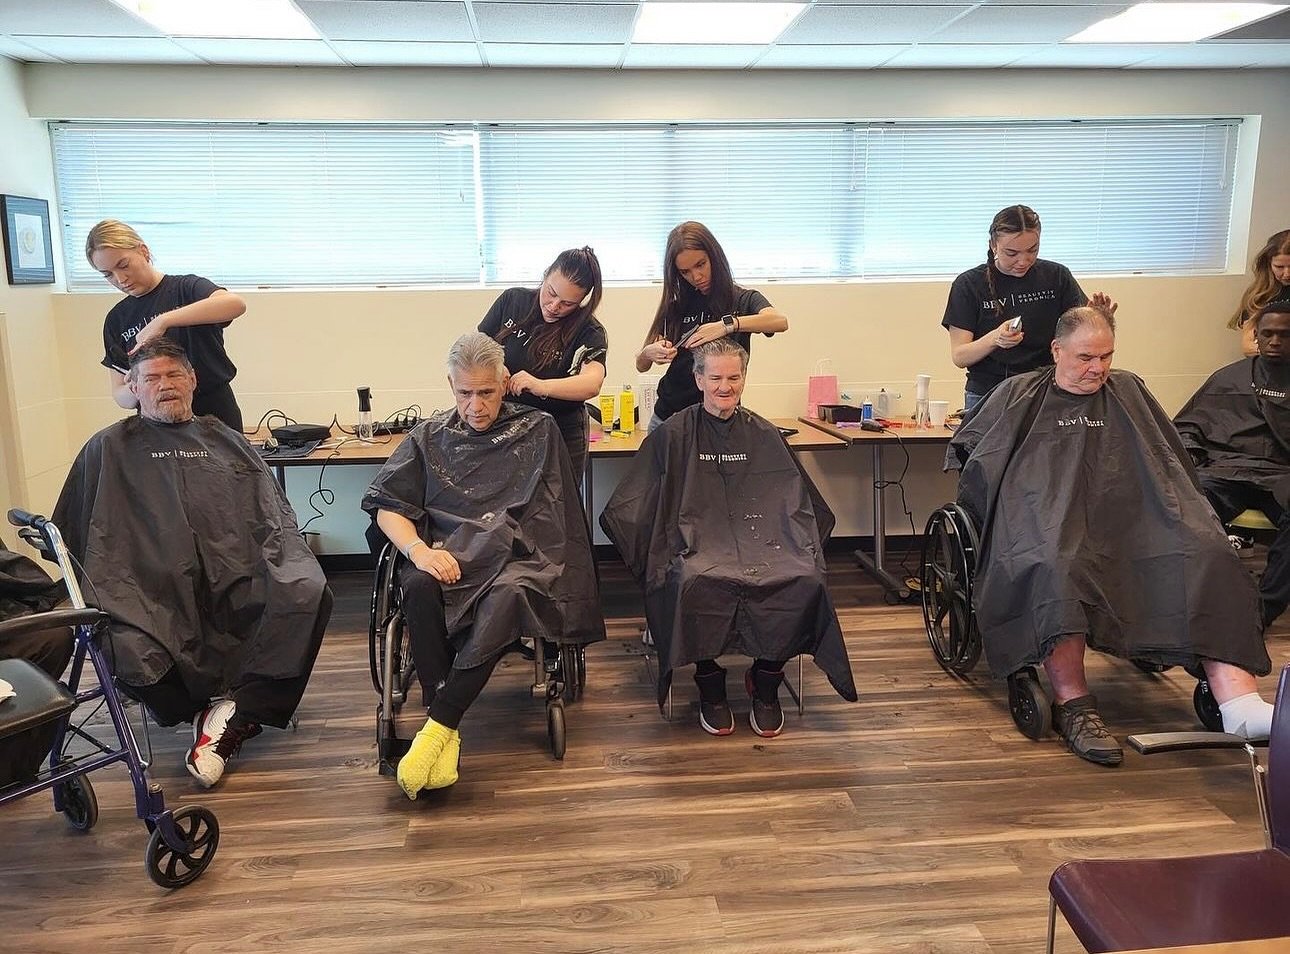 Volunteers from the Beauty by Veronica (BBV) salon are joining forces to offer haircuts to respite patients at Circle the City. @circlethecityaz is a nonprofit organization that provides healthcare and hope to thousands of individuals facing homeless